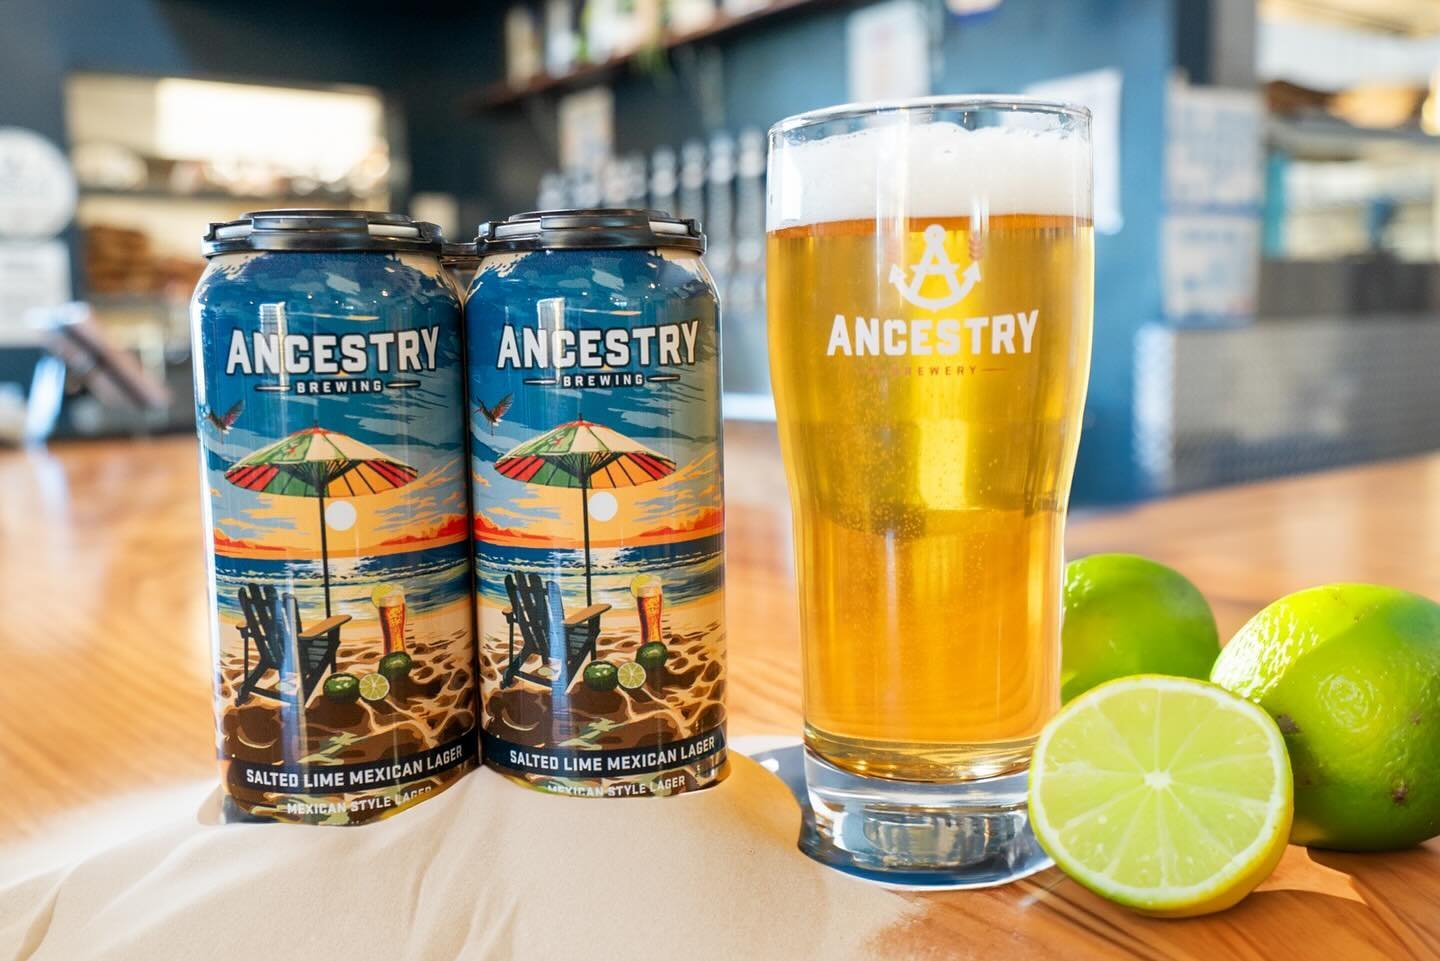 If you haven&rsquo;t tried our Salted Lime Mexican Lager you need to next chance you get! Let&rsquo;s kick off summer with a crisp, citrusy lager. 🍻☀️🍋&zwj;🟩🧂